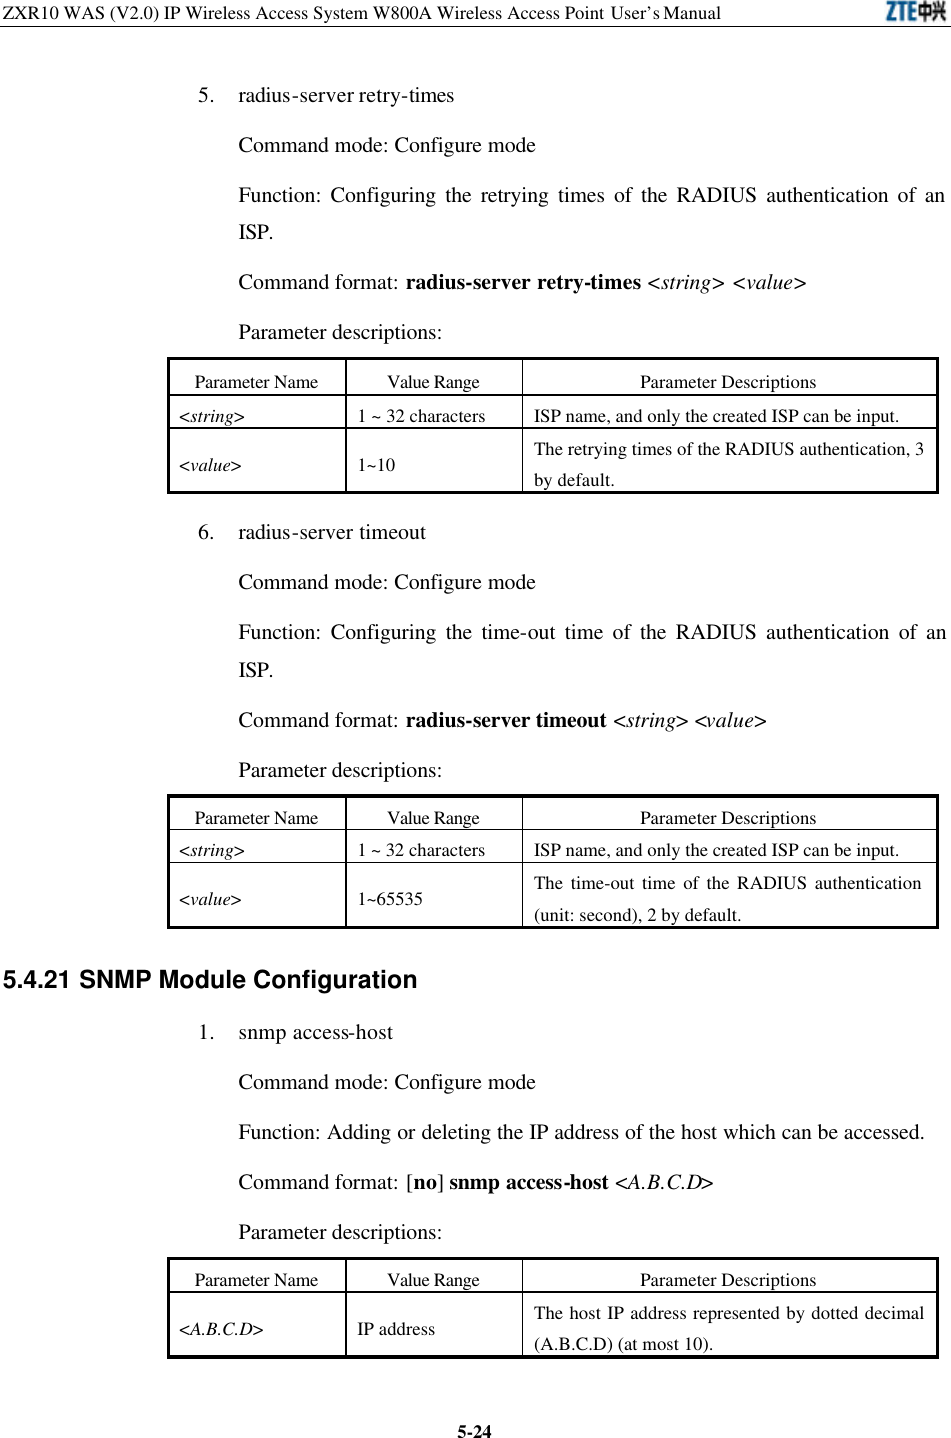 ZXR10 WAS (V2.0) IP Wireless Access System W800A Wireless Access Point User’s Manual  5-245. radius-server retry-times Command mode: Configure mode   Function: Configuring the retrying times of the RADIUS authentication of an ISP.   Command format: radius-server retry-times &lt;string&gt; &lt;value&gt; Parameter descriptions:   Parameter Name Value Range Parameter Descriptions &lt;string&gt; 1 ~ 32 characters ISP name, and only the created ISP can be input.   &lt;value&gt; 1~10 The retrying times of the RADIUS authentication, 3 by default.   6. radius-server timeout Command mode: Configure mode   Function: Configuring the time-out time of the RADIUS authentication of an ISP.   Command format: radius-server timeout &lt;string&gt; &lt;value&gt; Parameter descriptions:   Parameter Name Value Range Parameter Descriptions &lt;string&gt;   1 ~ 32 characters ISP name, and only the created ISP can be input.   &lt;value&gt; 1~65535 The time-out time of the RADIUS authentication (unit: second), 2 by default.   5.4.21 SNMP Module Configuration   1. snmp access-host Command mode: Configure mode   Function: Adding or deleting the IP address of the host which can be accessed.   Command format: [no] snmp access-host &lt;A.B.C.D&gt; Parameter descriptions:   Parameter Name Value Range Parameter Descriptions &lt;A.B.C.D&gt; IP address   The host IP address represented by dotted decimal (A.B.C.D) (at most 10).   